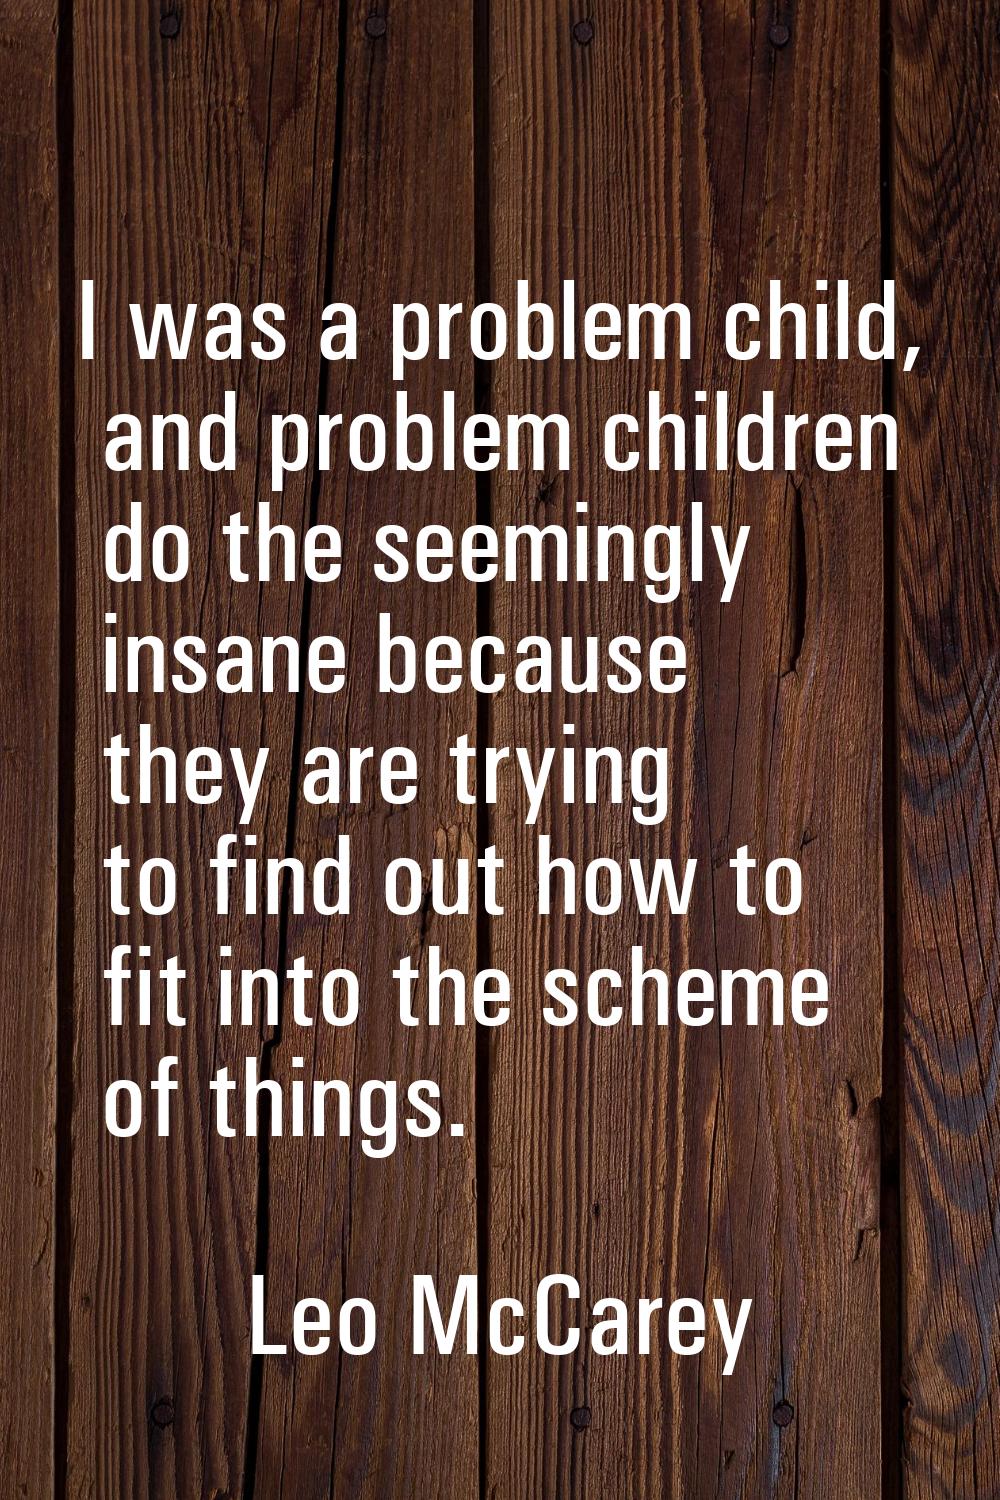 I was a problem child, and problem children do the seemingly insane because they are trying to find